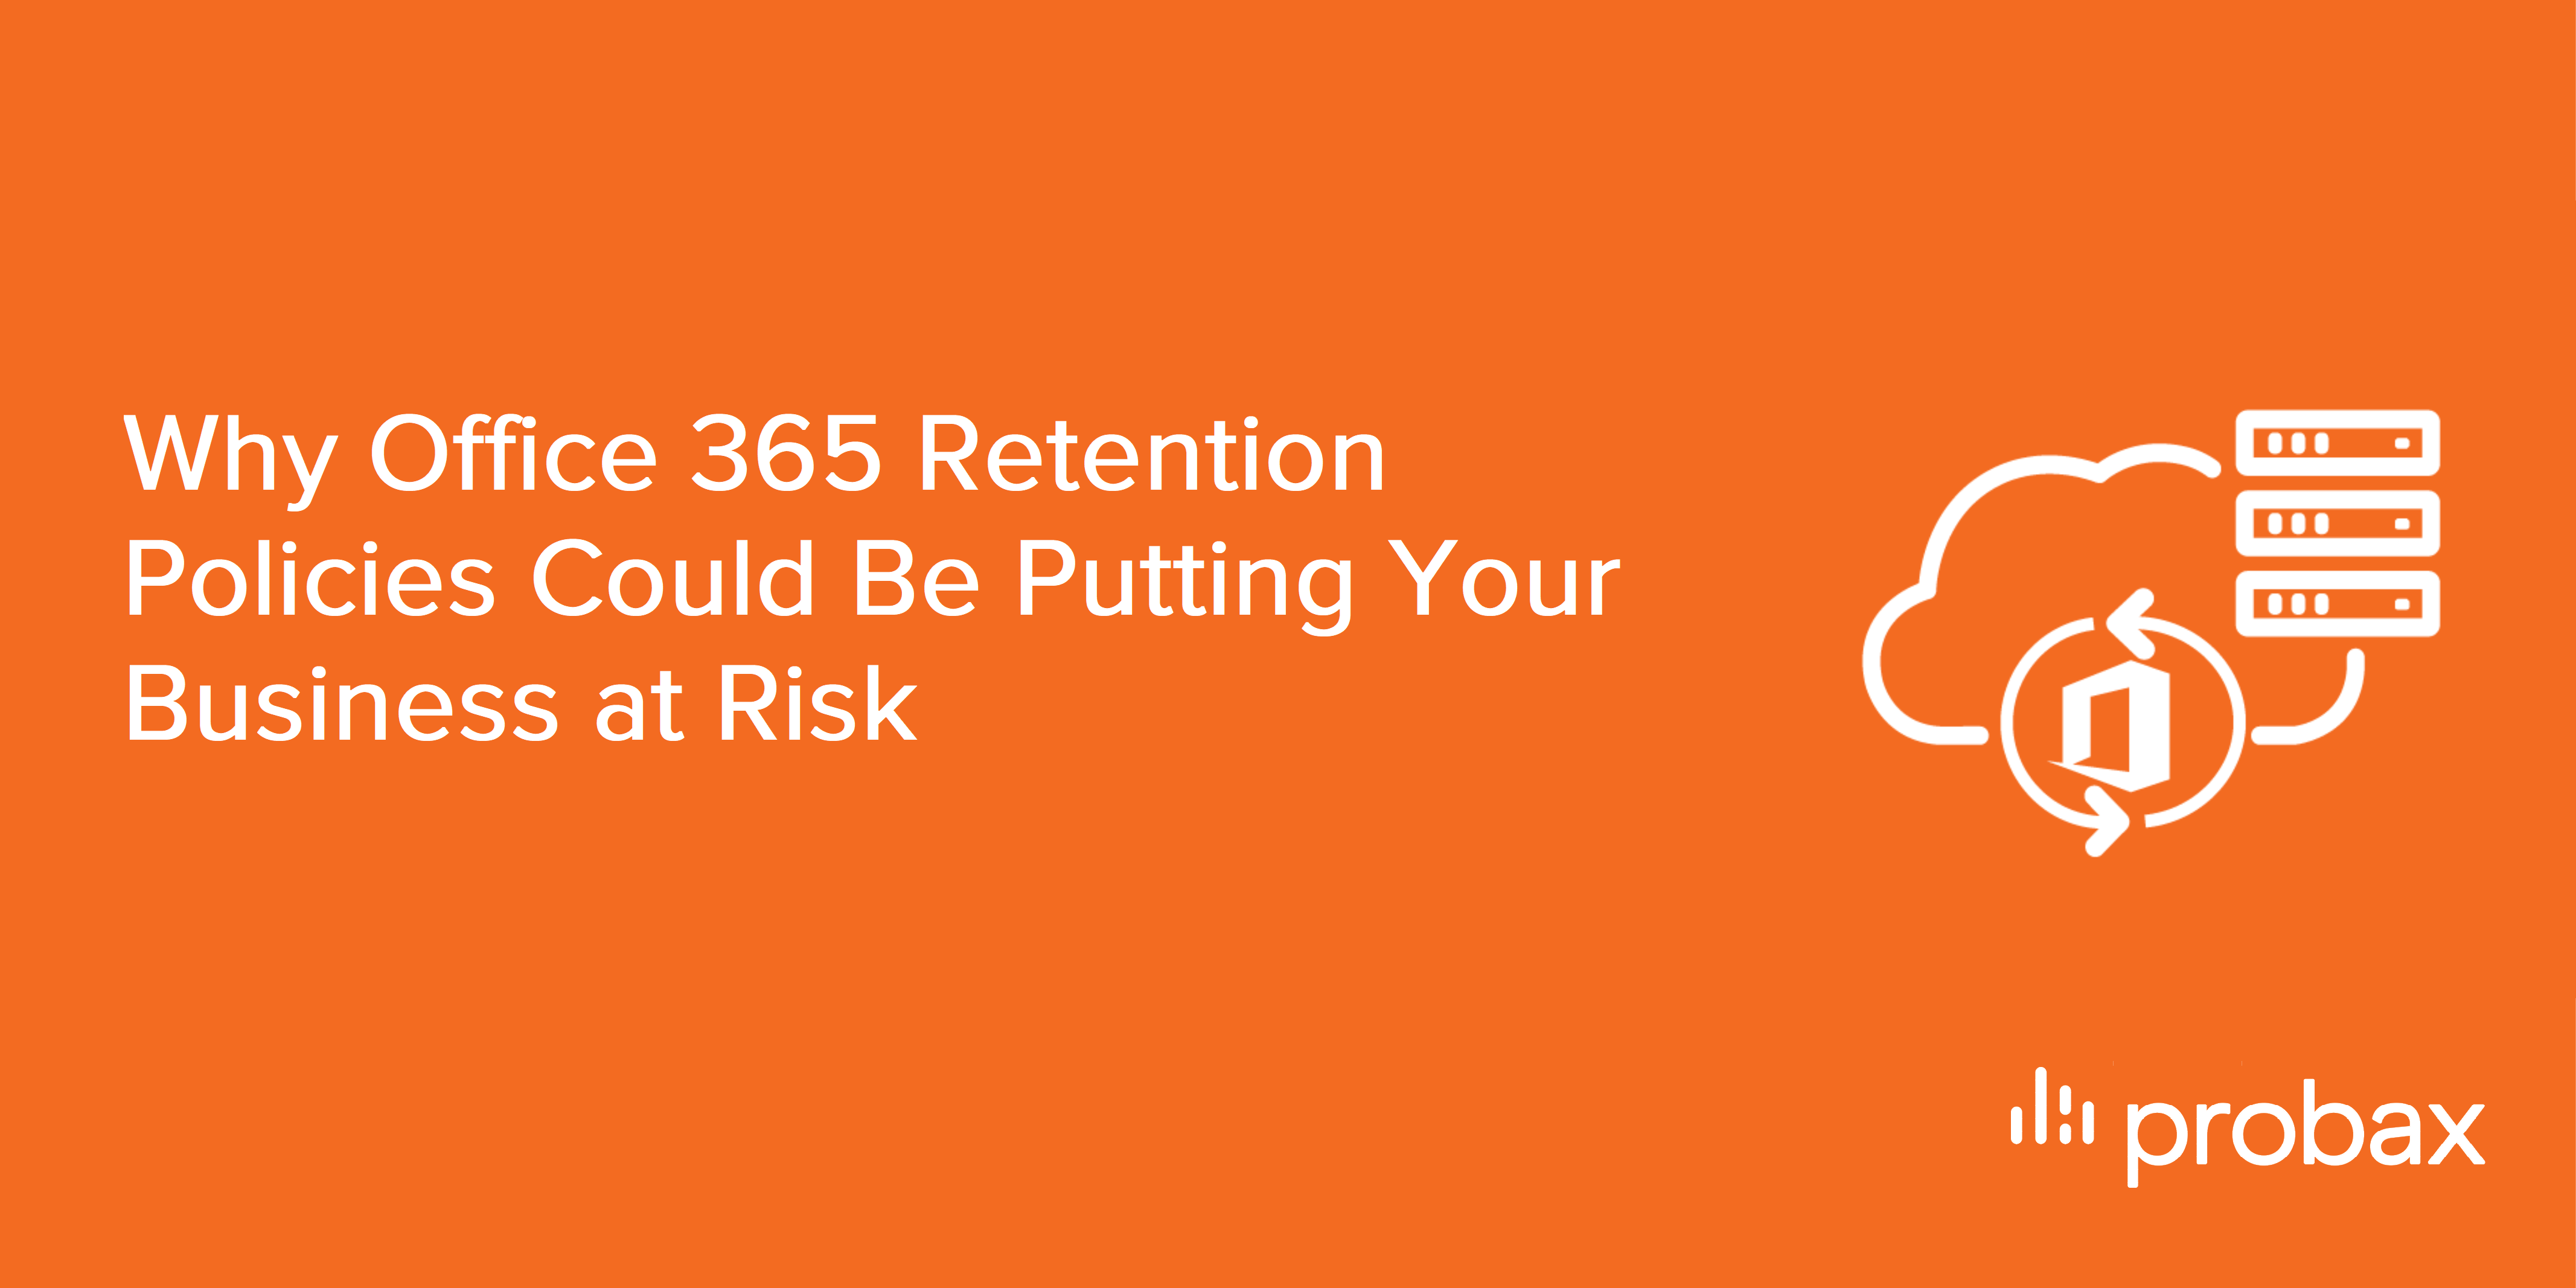 Why Office 365 Retention Policies Could Be Putting Your Business At